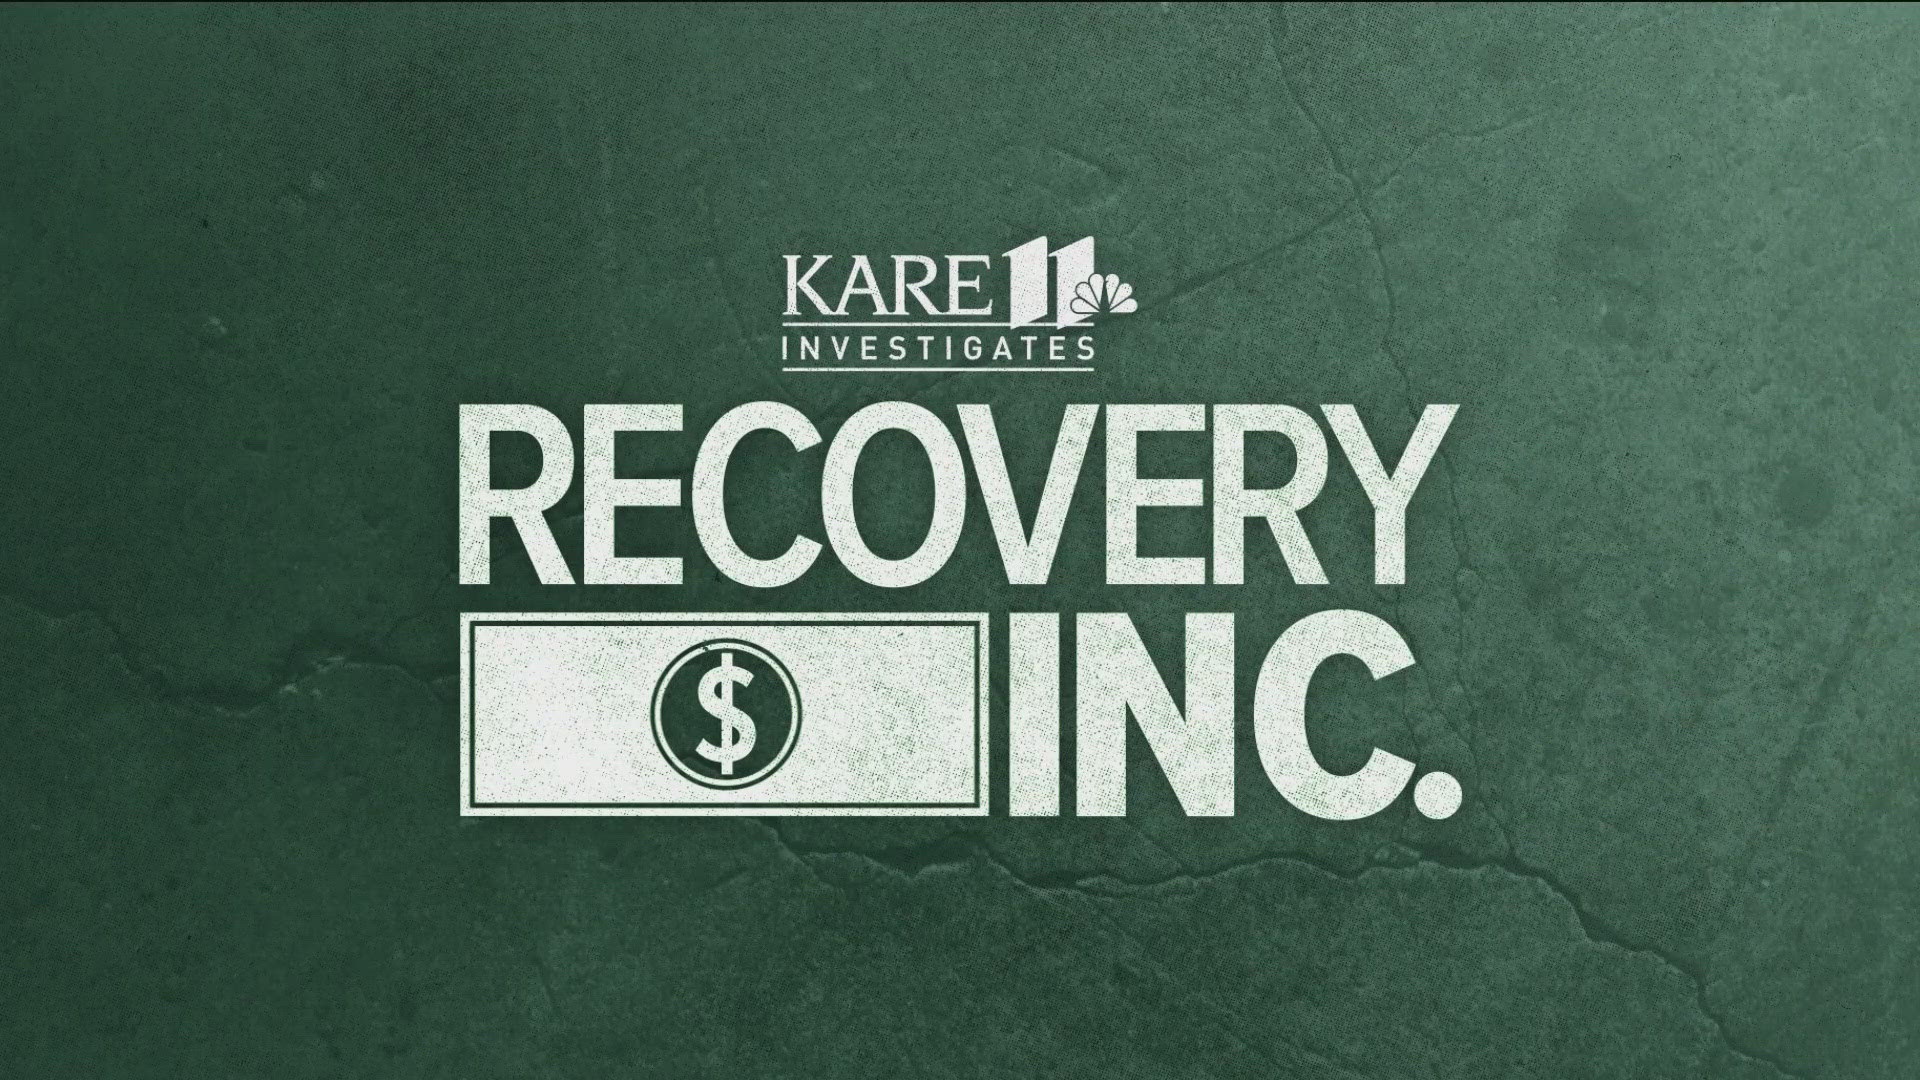 After KARE 11 exposed allegations of overbilling, Minnesota enacts new laws to reign in abuses in addiction recovery programs providing peer services.